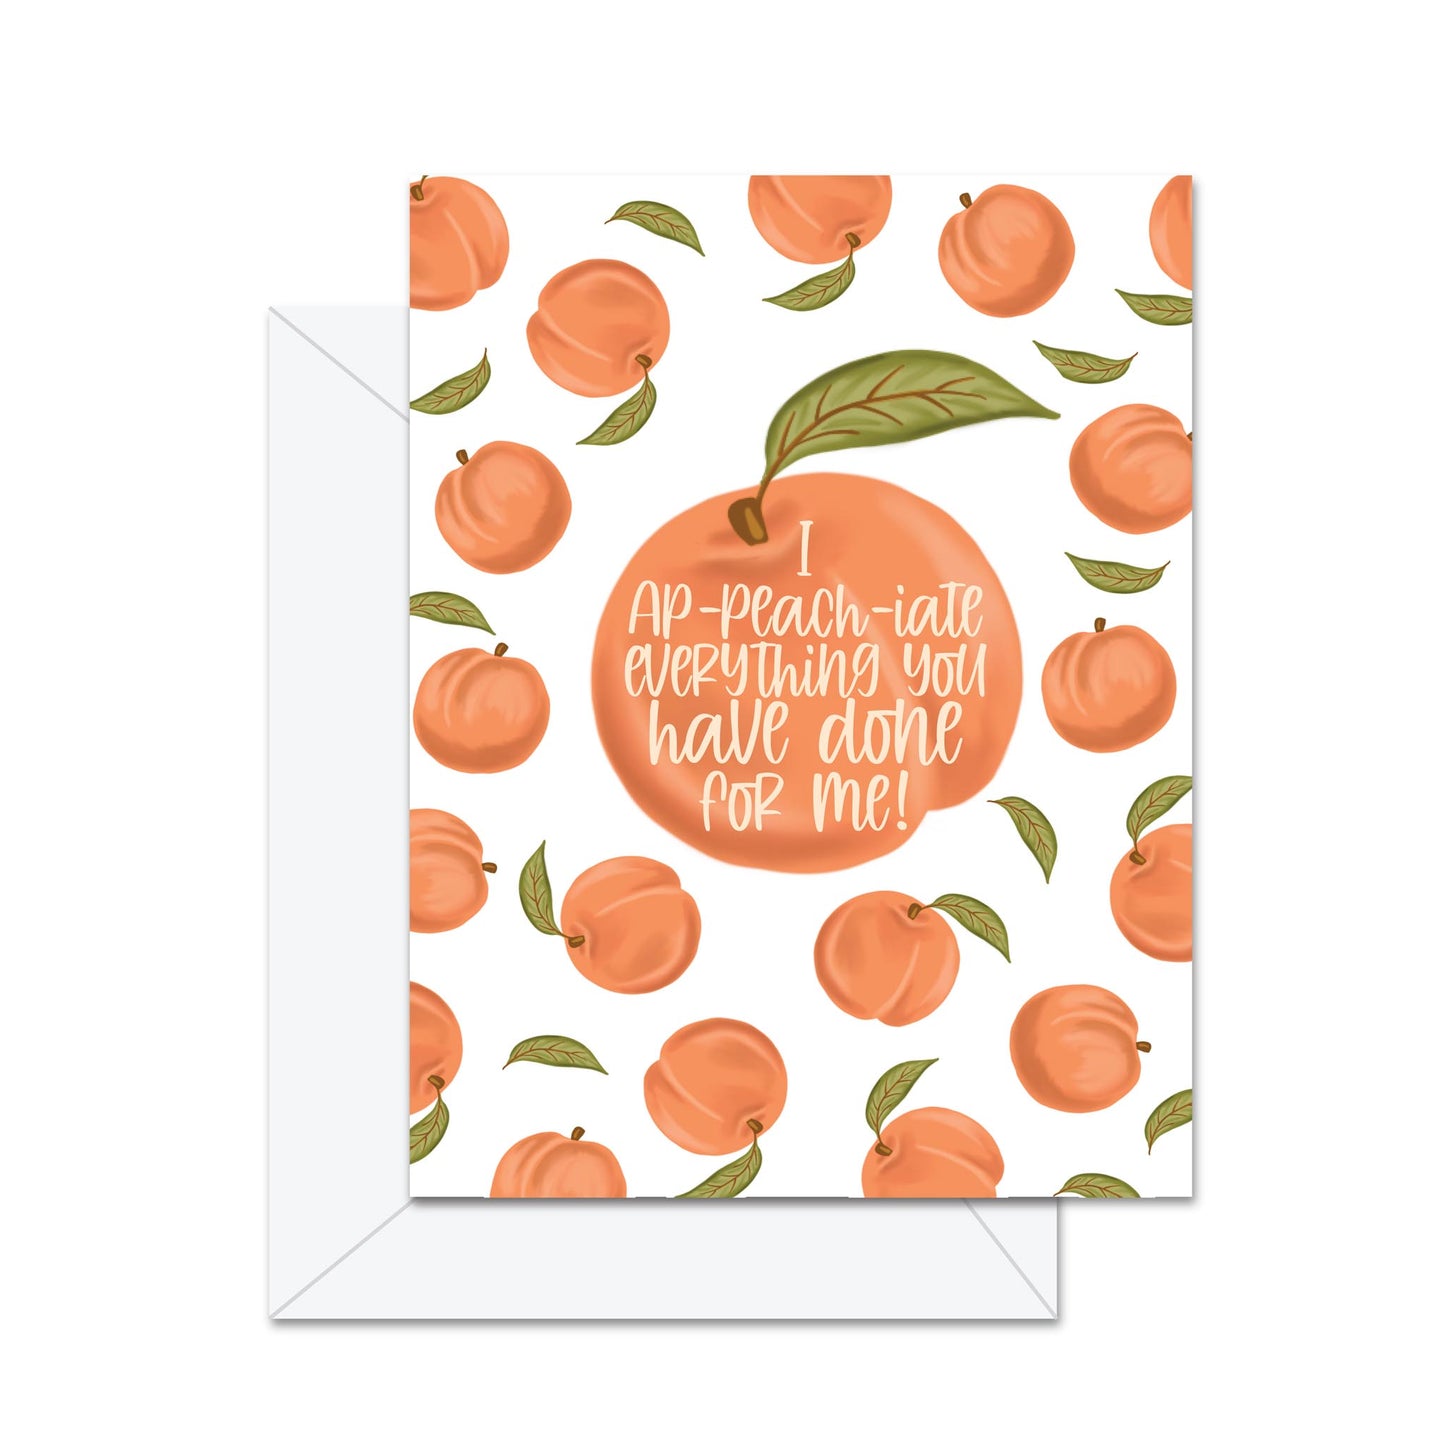 I Ap-peach-iate everything you have done for me! - Greeting Card